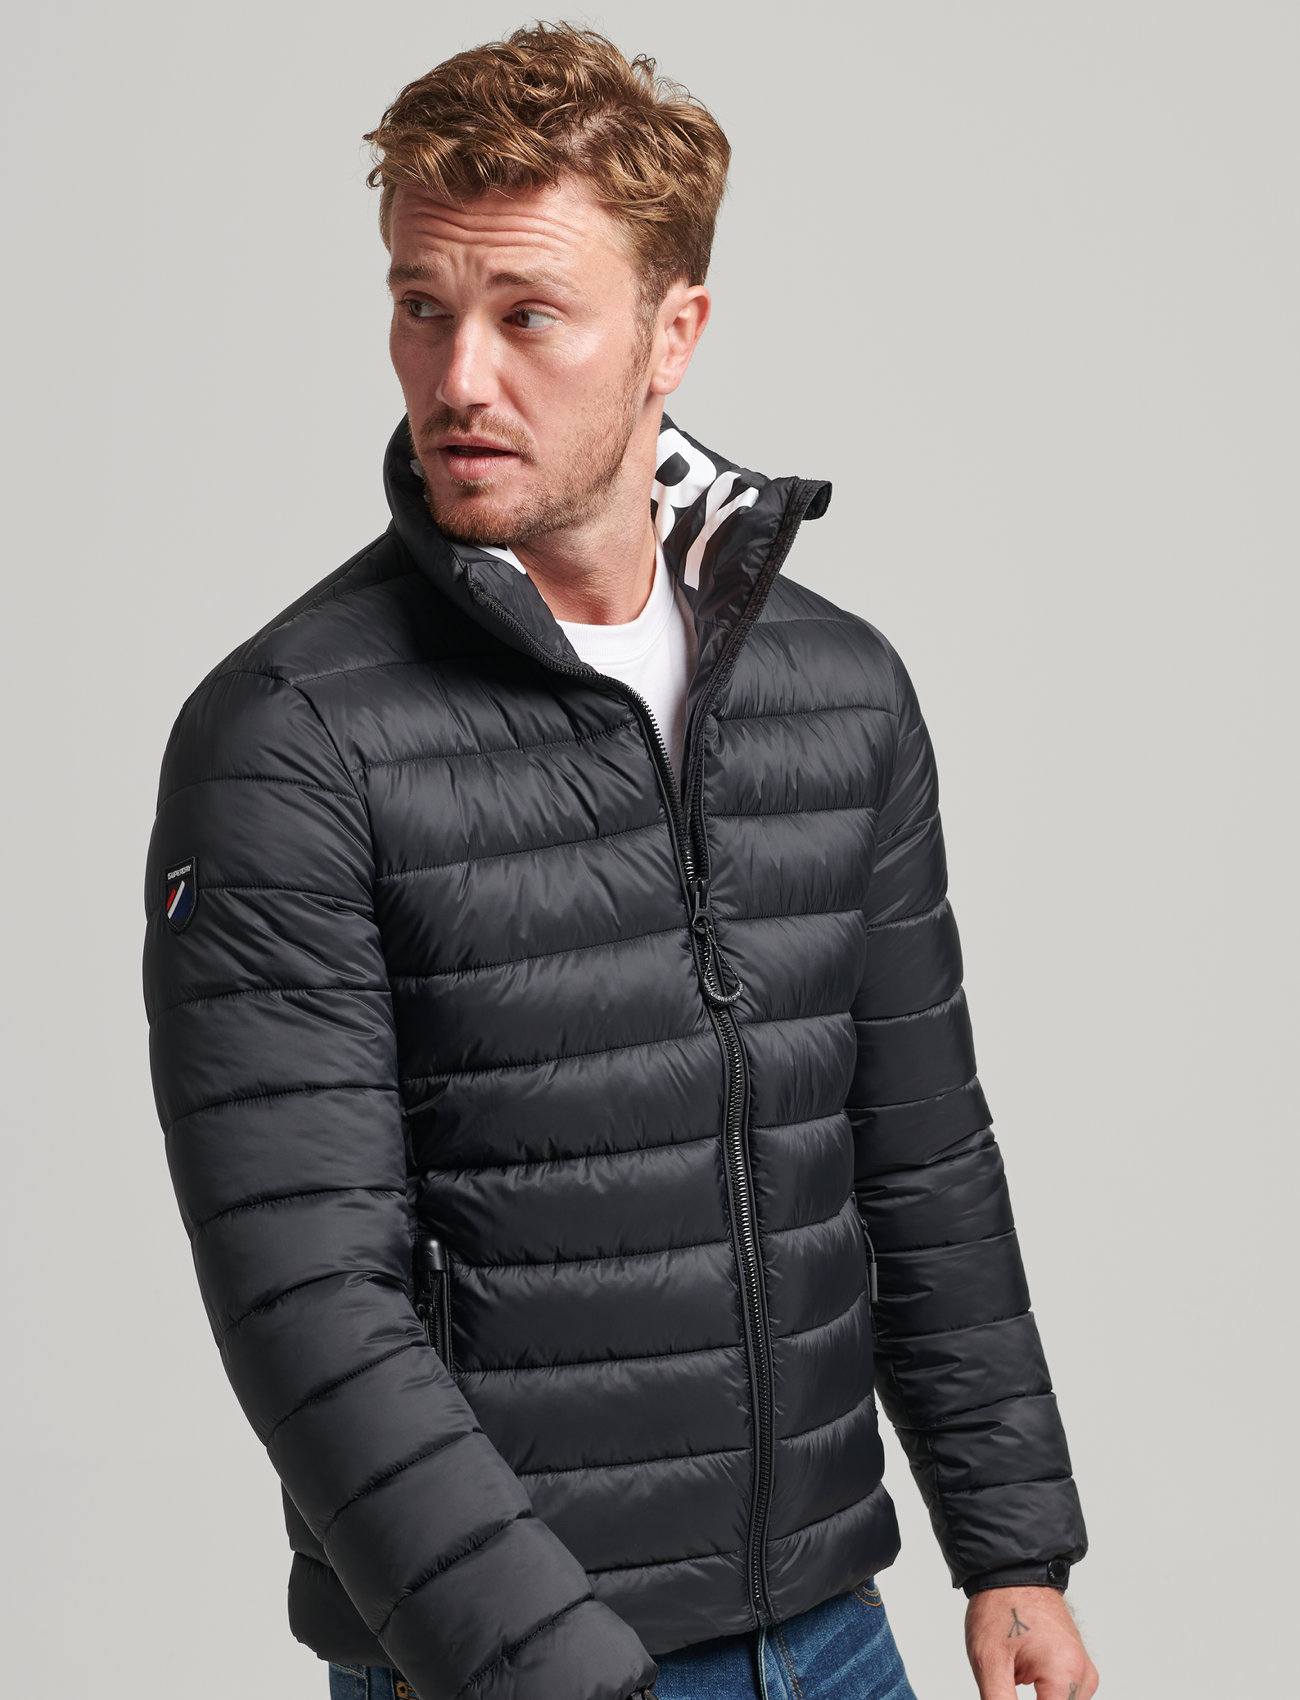 Superdry Code Mtn Non Hood Fuji Jkt - 99.99 €. Buy Padded jackets from  Superdry online at Boozt.com. Fast delivery and easy returns